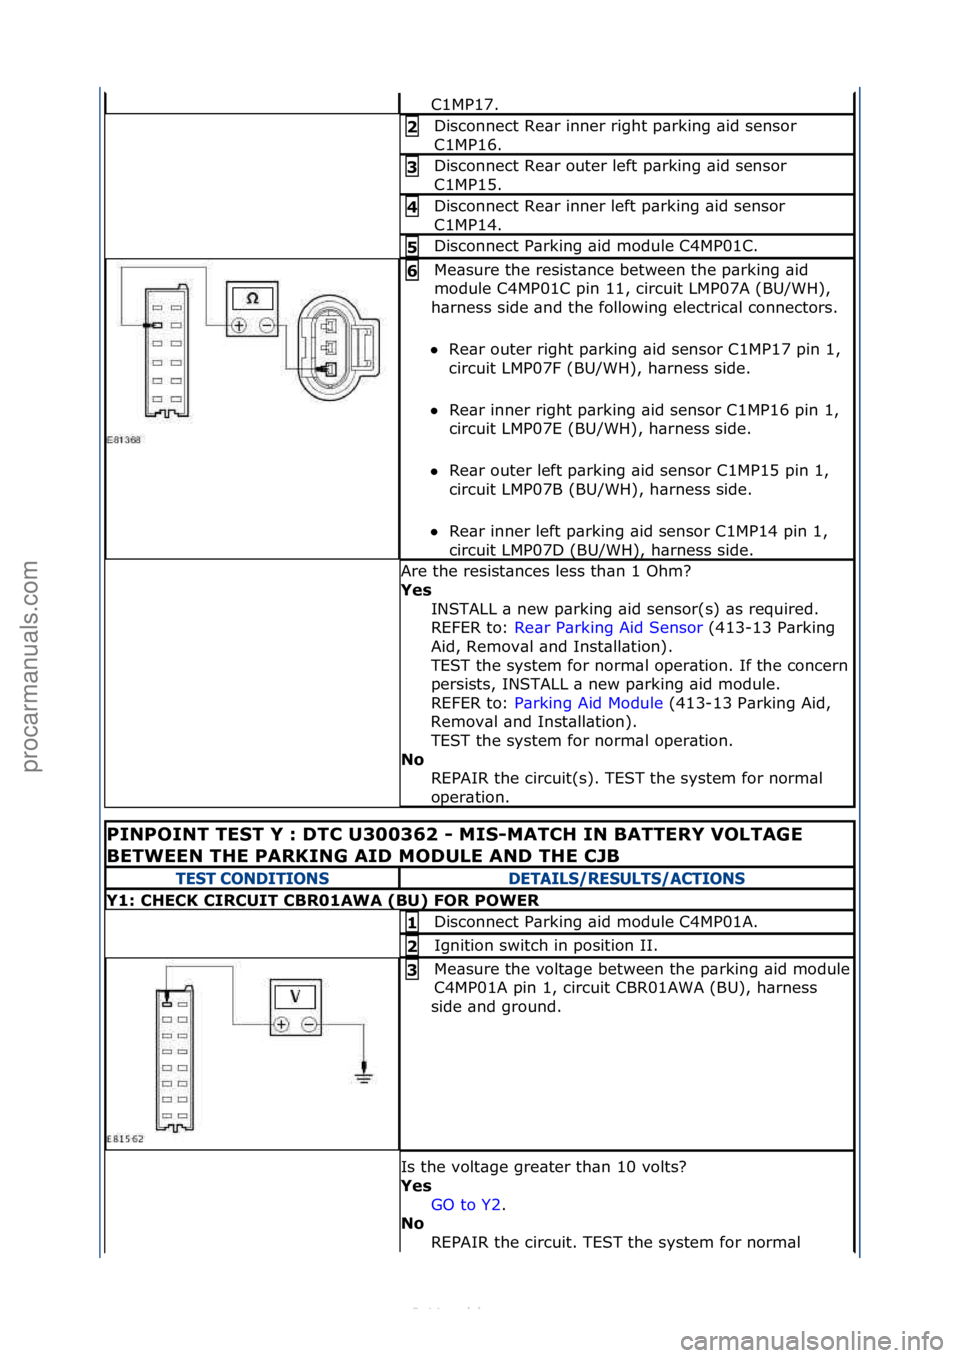 FORD S-MAX 2006  Service Repair Manual C1MP17.\f
Disconnect\fRe\br\finner\fright\fp\brking\f\bid\fsensor\f
C1MP16.\f2\b
Disconnect\fRe\br\fouter\fleft\fp\brking\f\bid\fsensor\f
C1MP15.\f3\b
Disconnect\fRe\br\finner\fleft\fp\brking\f\bid\fs